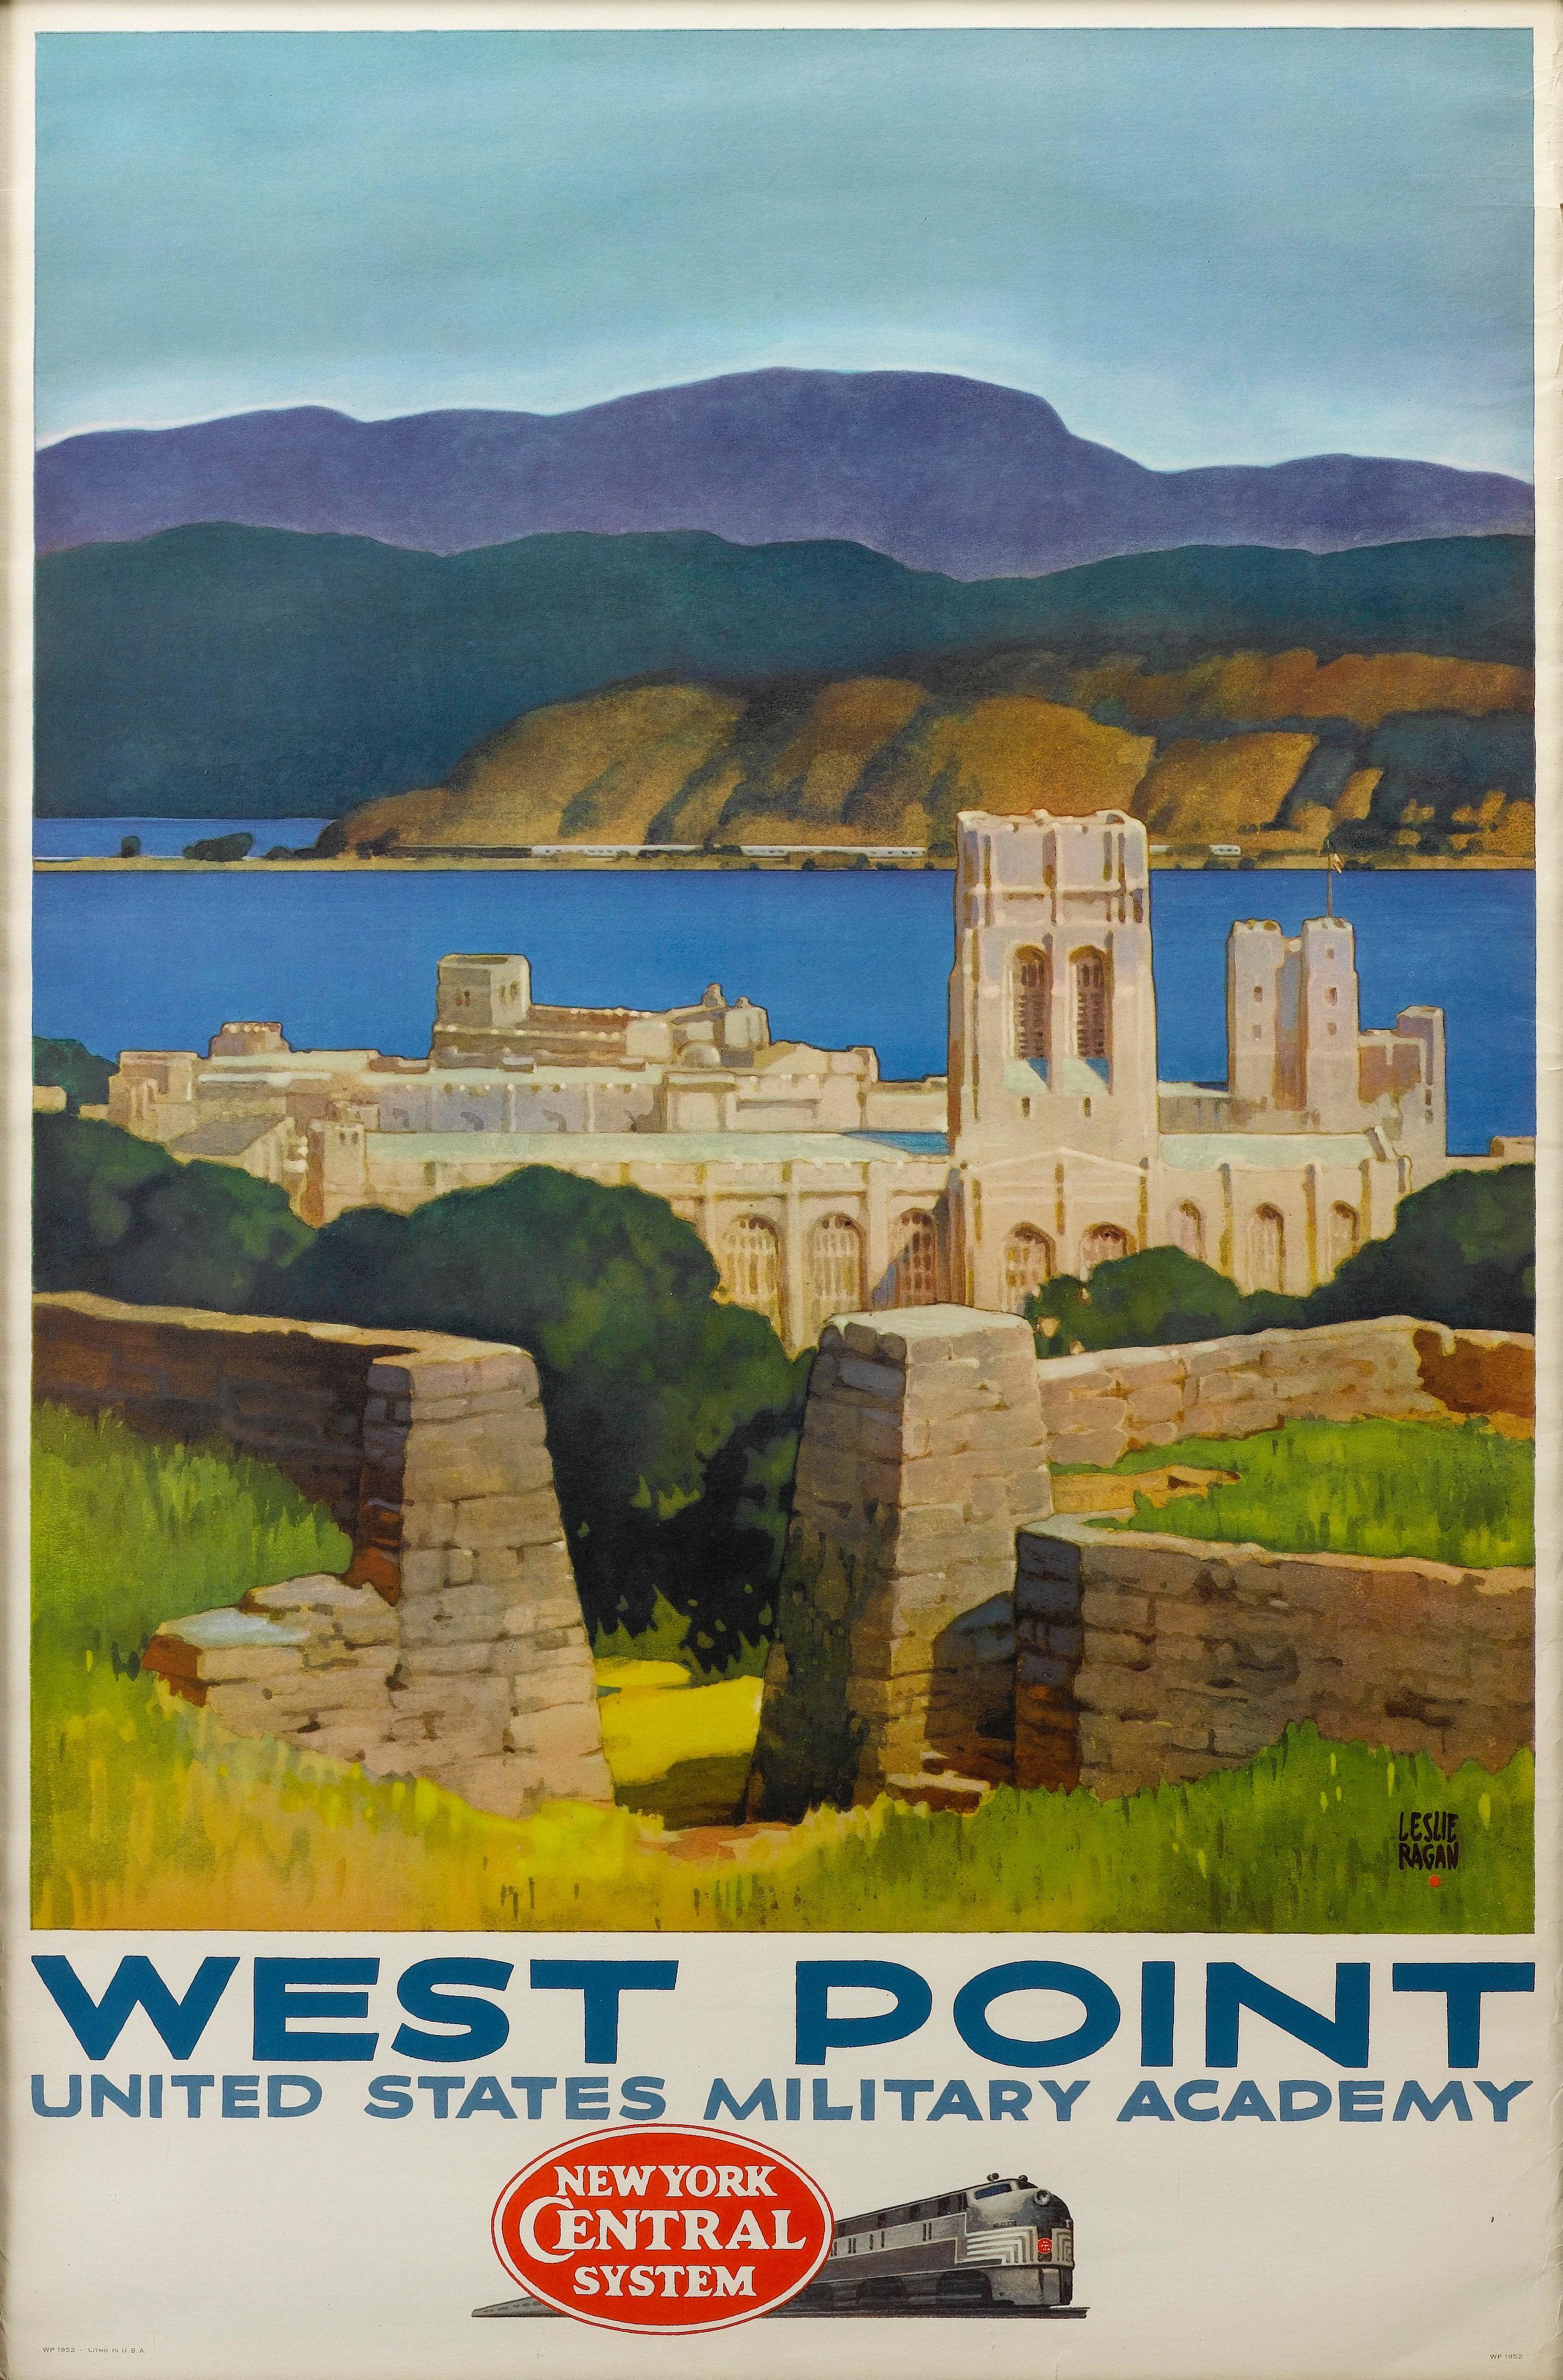 This is a vintage New York Central System Railway travel poster for the United States Military Academy at West Point. The poster depicts several neogothic granite academic buildings and the iconic Cadet Chapel, with a stunning vista of the Hudson